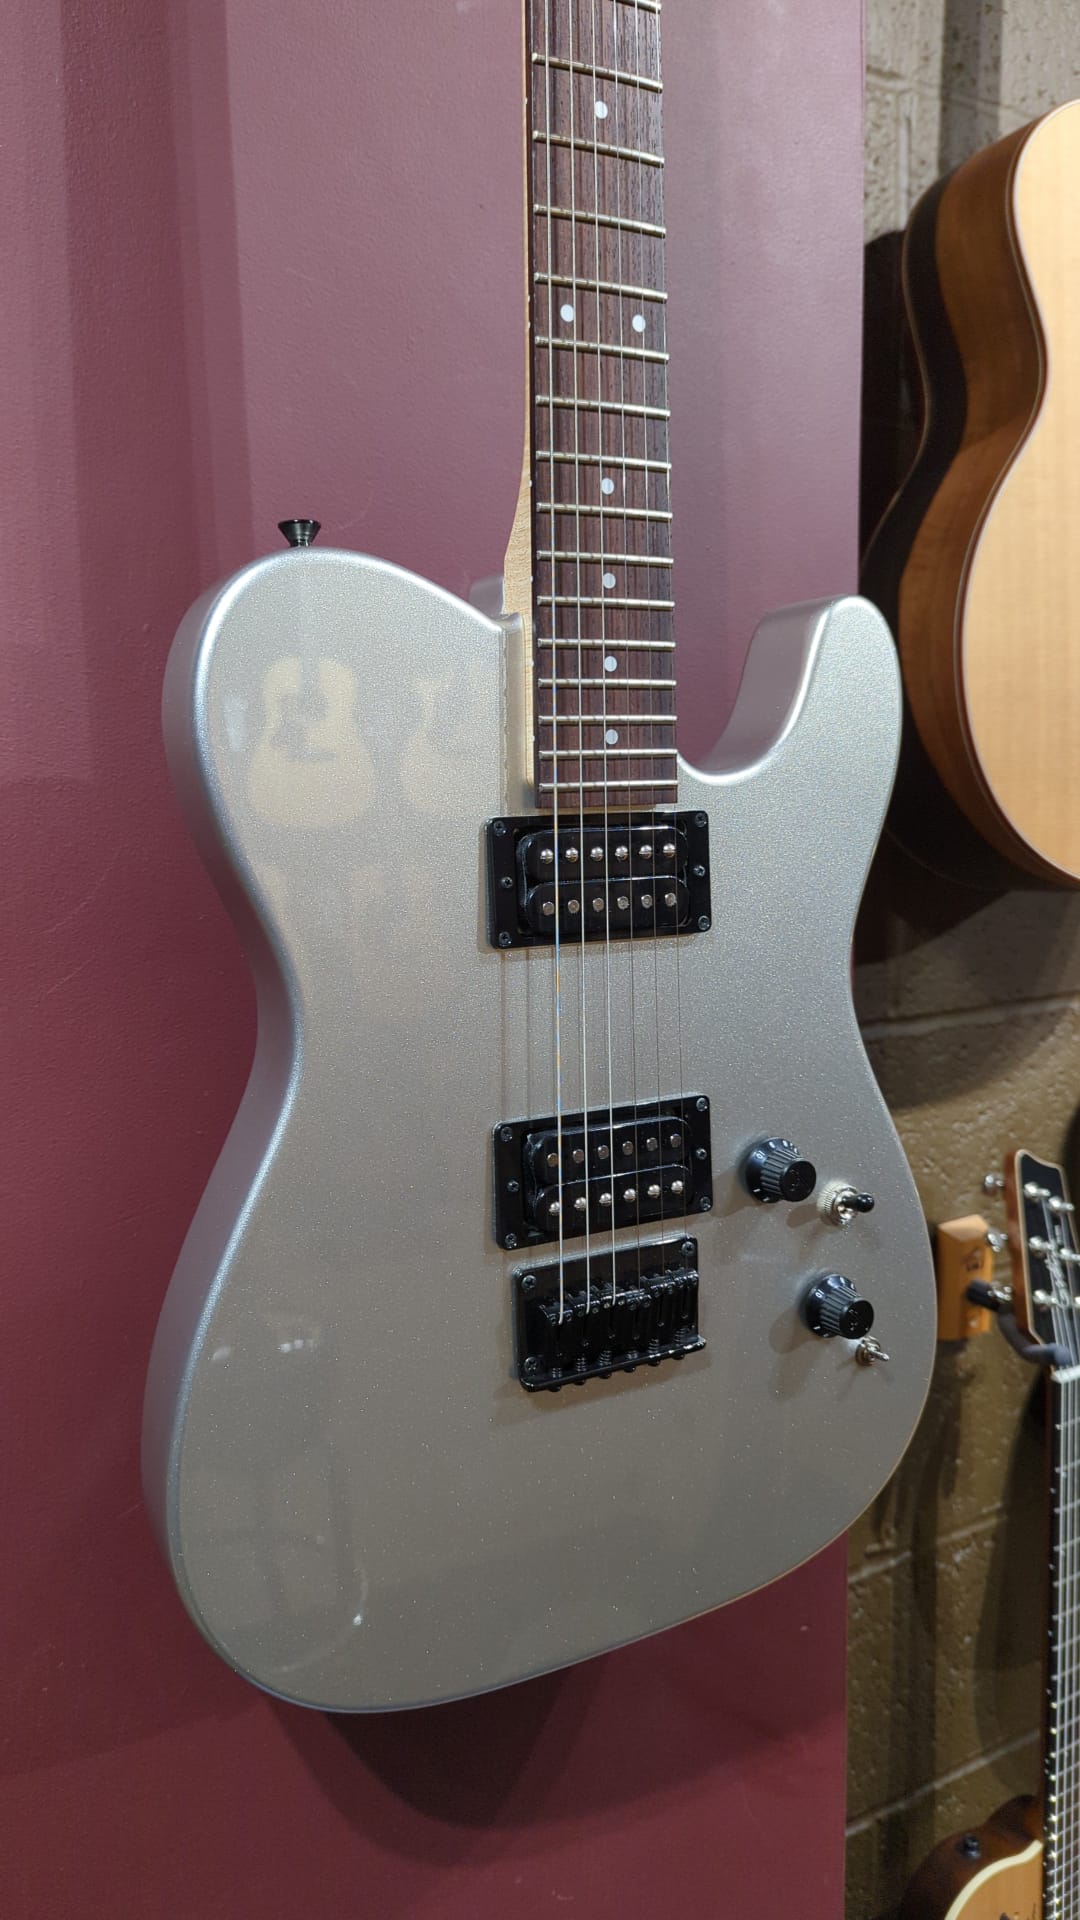 Fender MIJ boxer Telecaster HH (Used), Electric Guitar for sale at Richards Guitars.